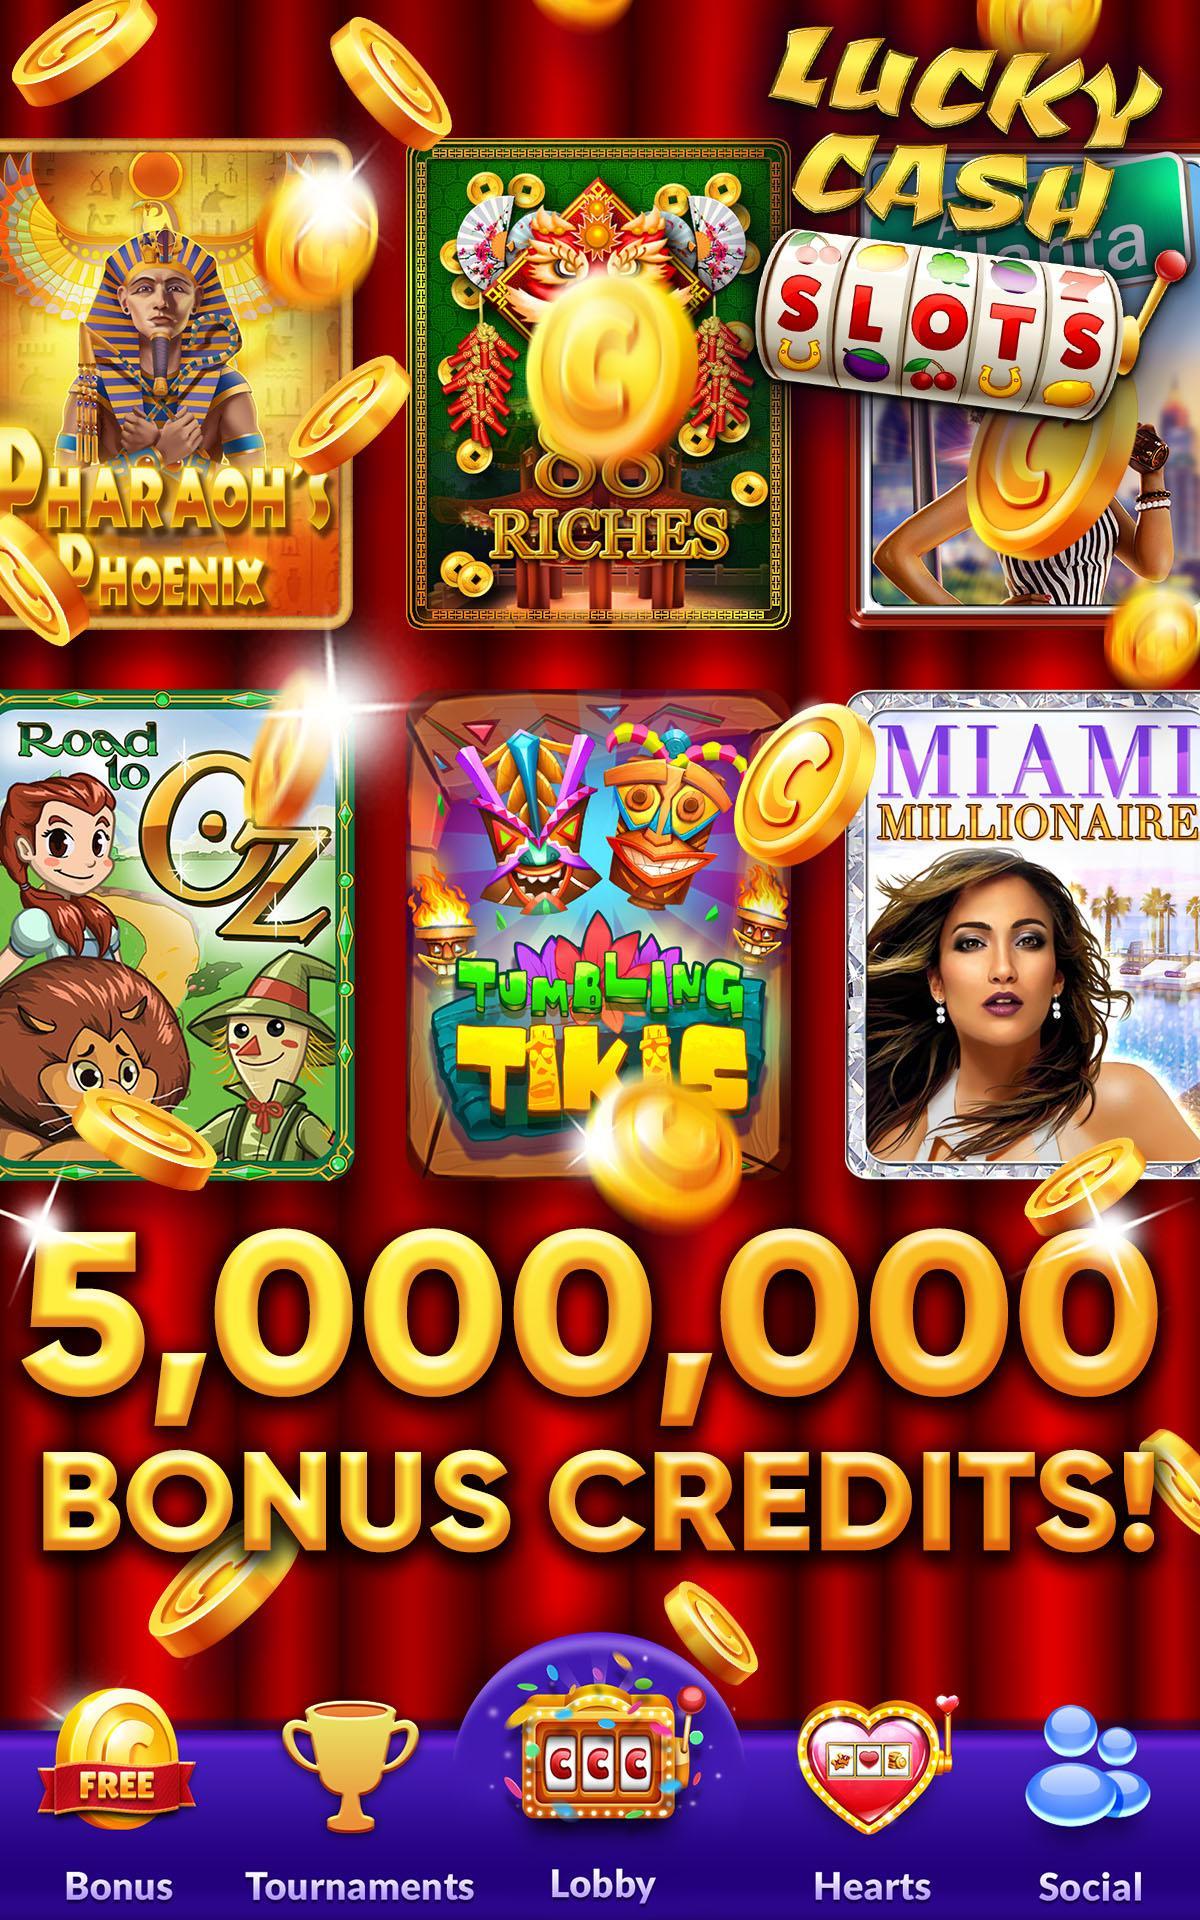 How To Play And Win Real Money On Slot Machine Apps